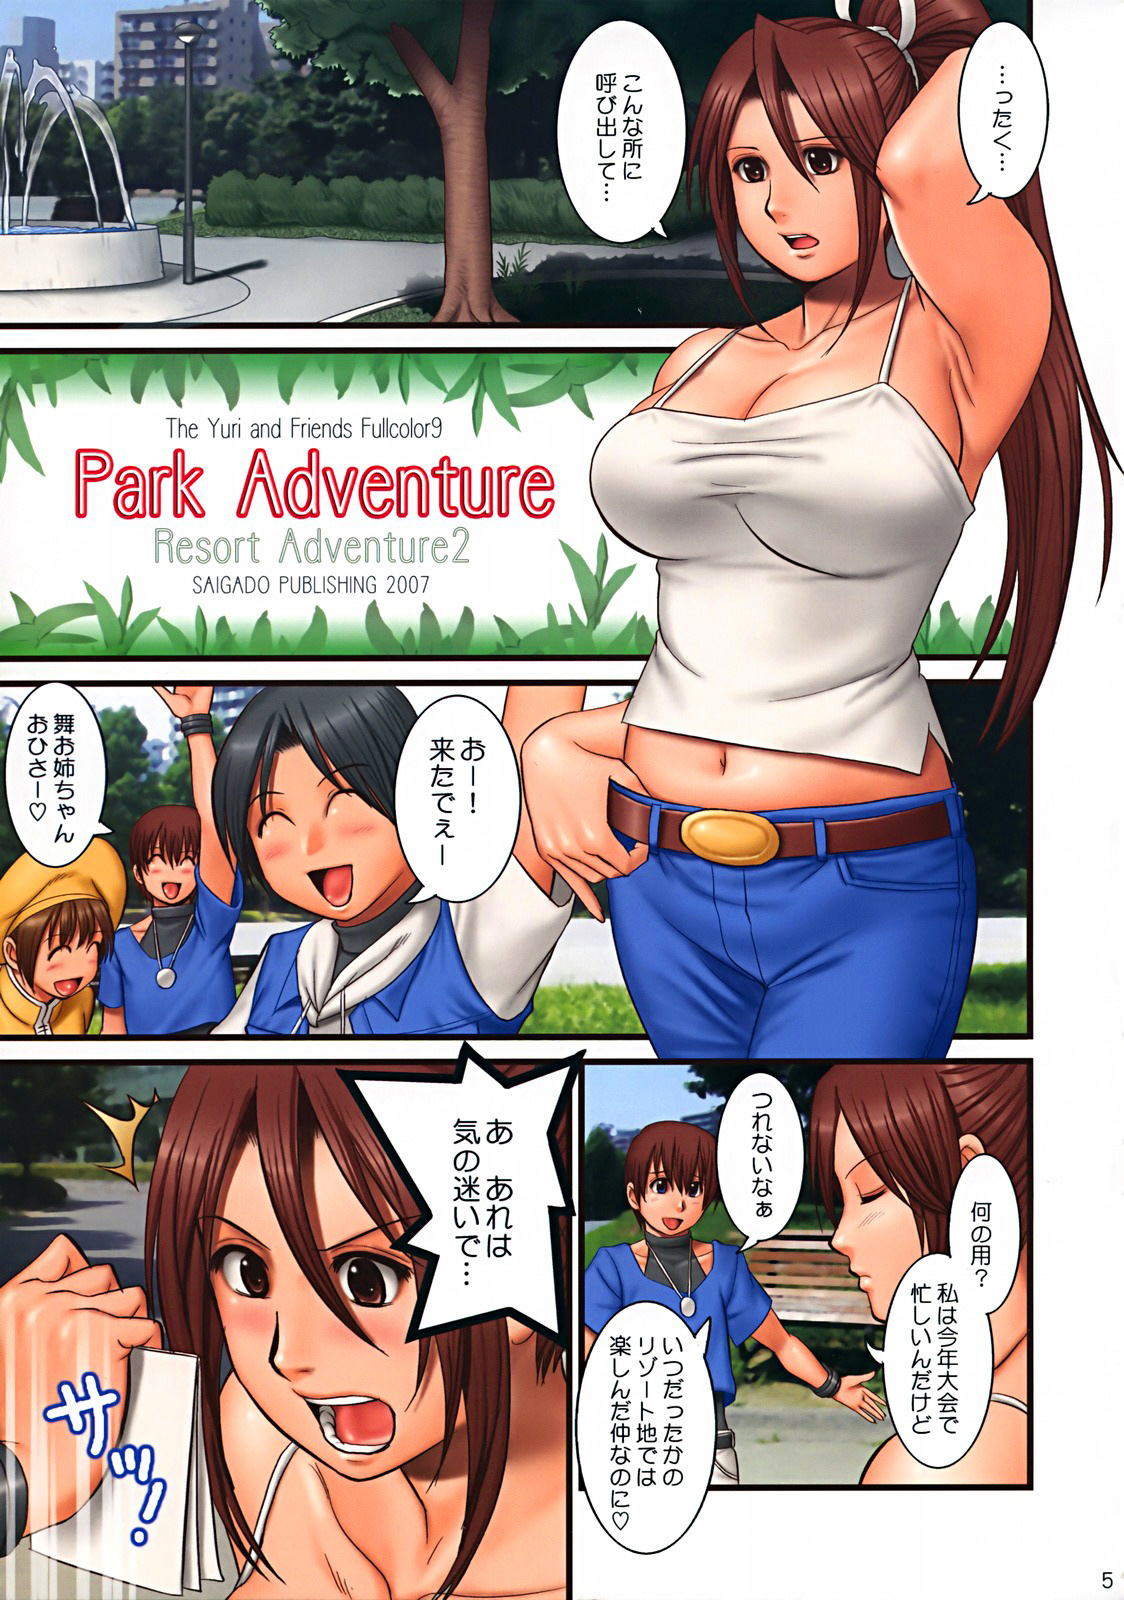 (C72) [Saigado] THE YURI & FRIENDS FULLCOLOR 9 (King of Fighters) [Decensored] page 4 full